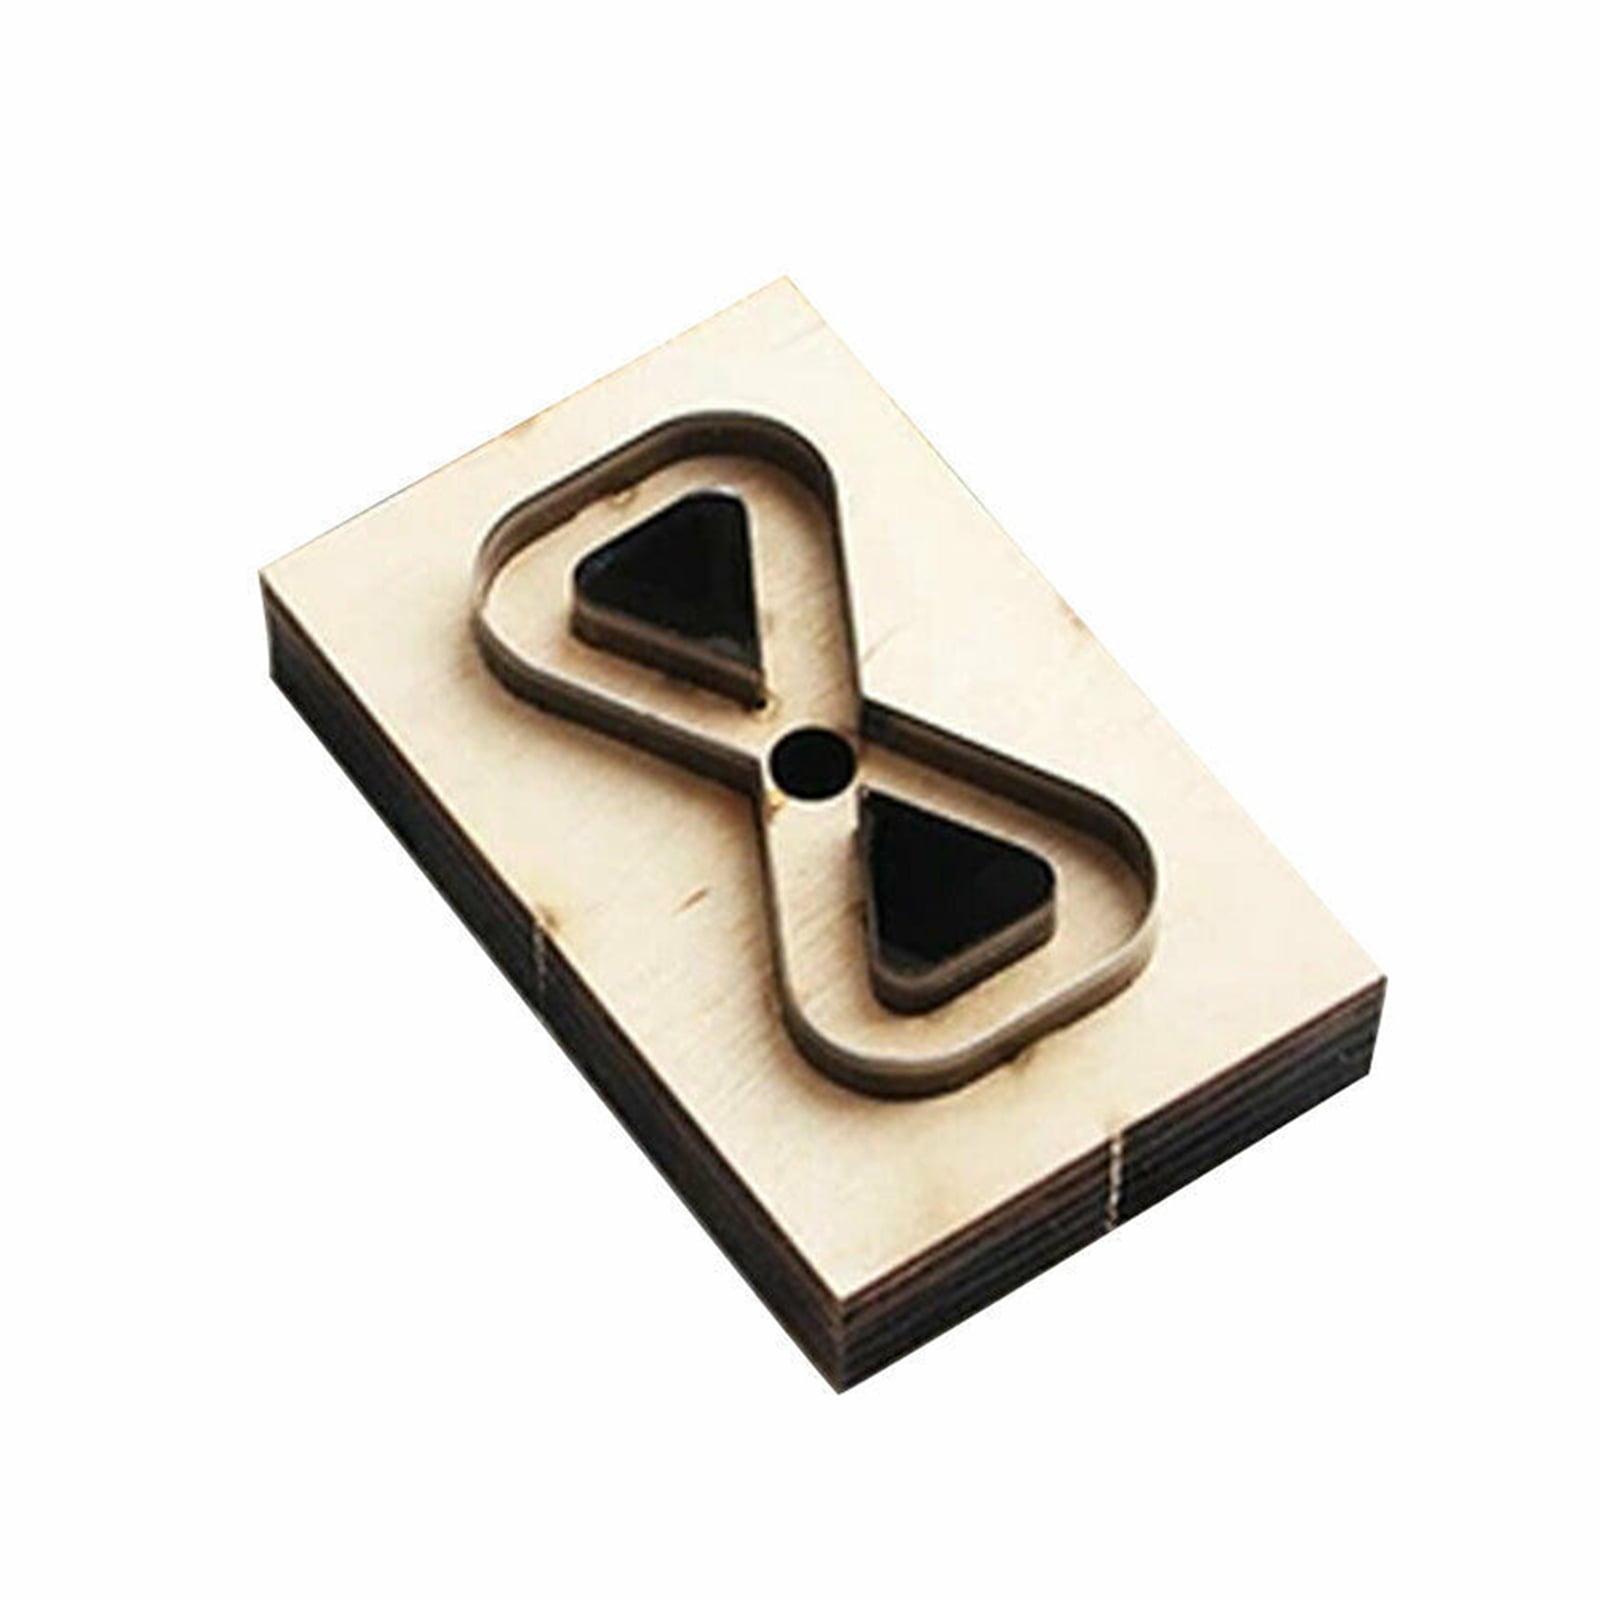 Leather Cutting Dies Scrapbook Embossing Wooden Die Cutting Leather Die Cutter Leather Leathercraft Tool for Jewelry Making Supplies, Size: 240x28mm